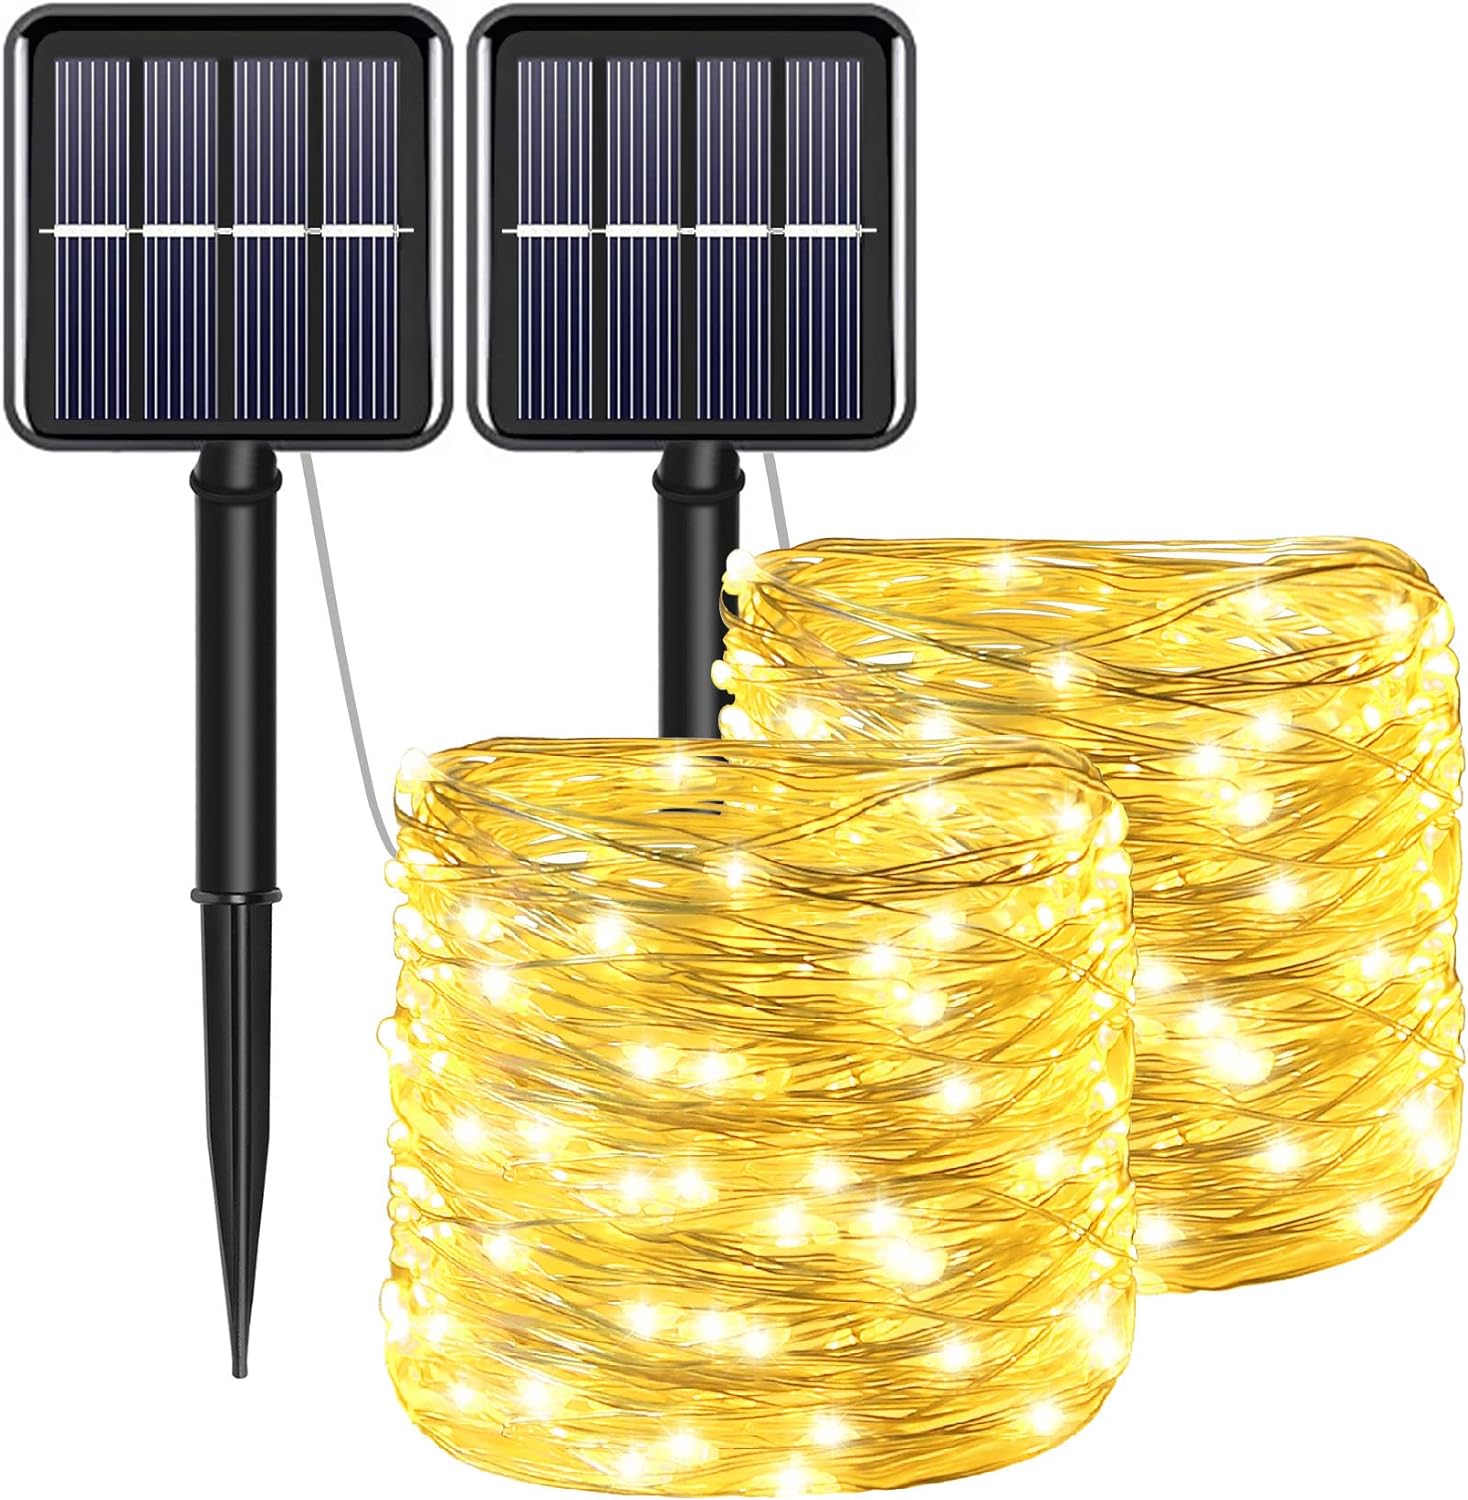 YAOZHOU Solar Lights for Outside, Fairy String Lights Outdoor Waterproof, Warm White 2Pack Total 200LED 66Ft 8 Modes for Christmas, Garden, Patio, Fence, Balcony